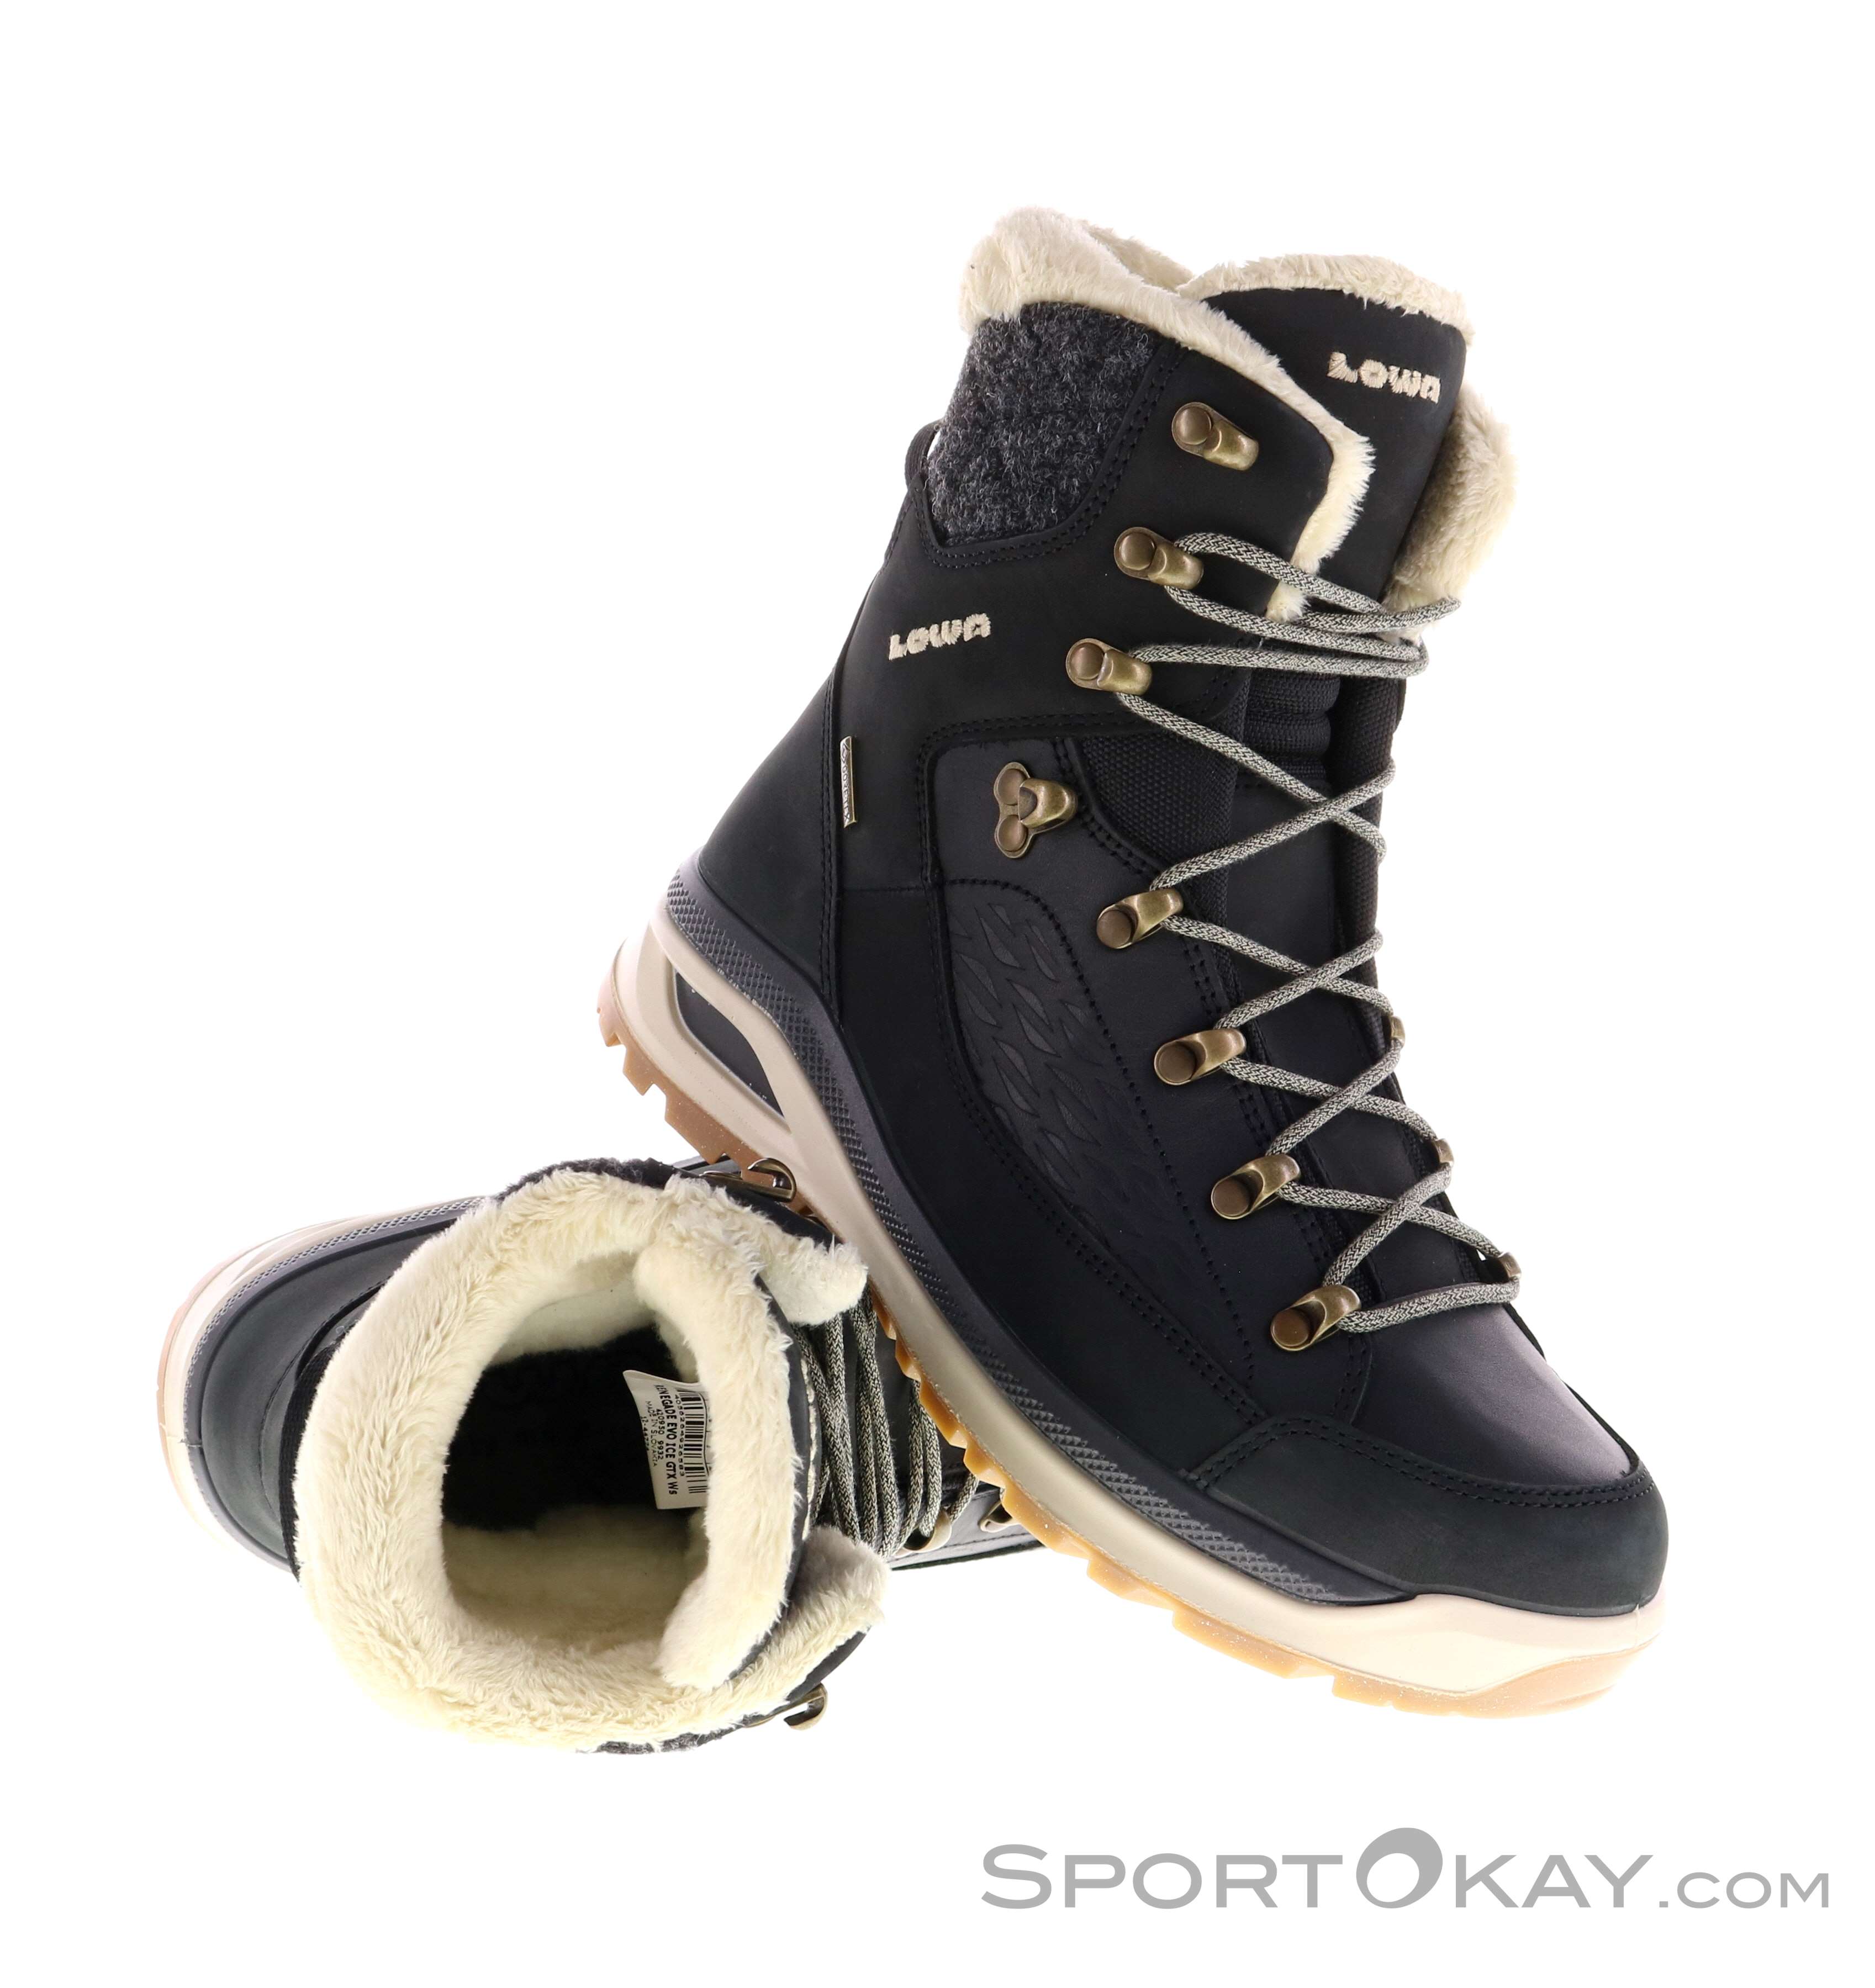 Lowa Evo Ice GTX Womens Winter Shoes - Leisure Shoes Shoes & Poles - Outdoor - All